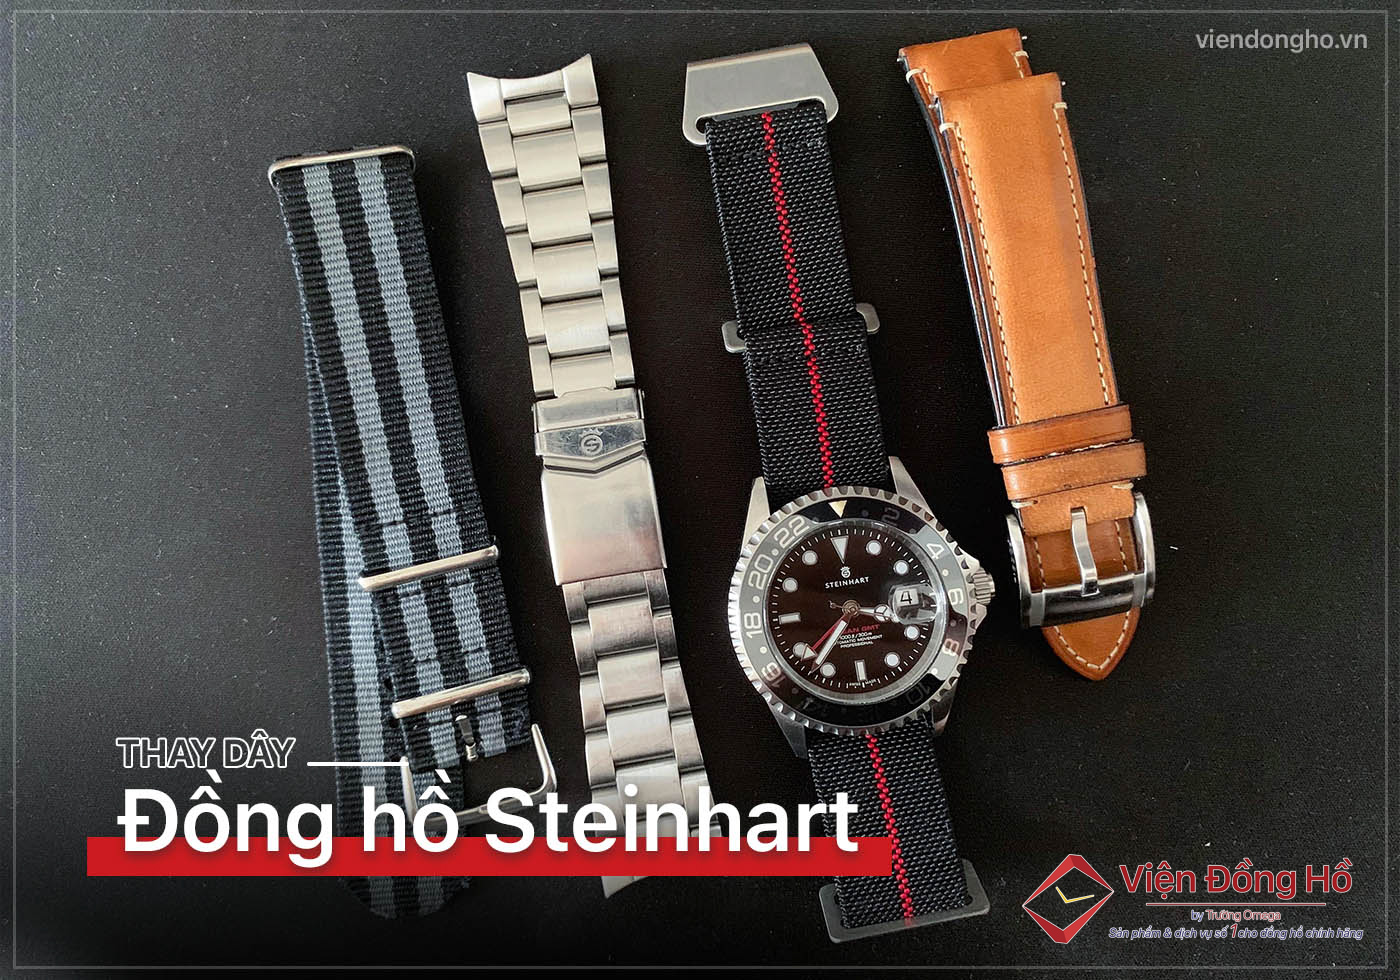 Thay day dong ho Steinhart 5